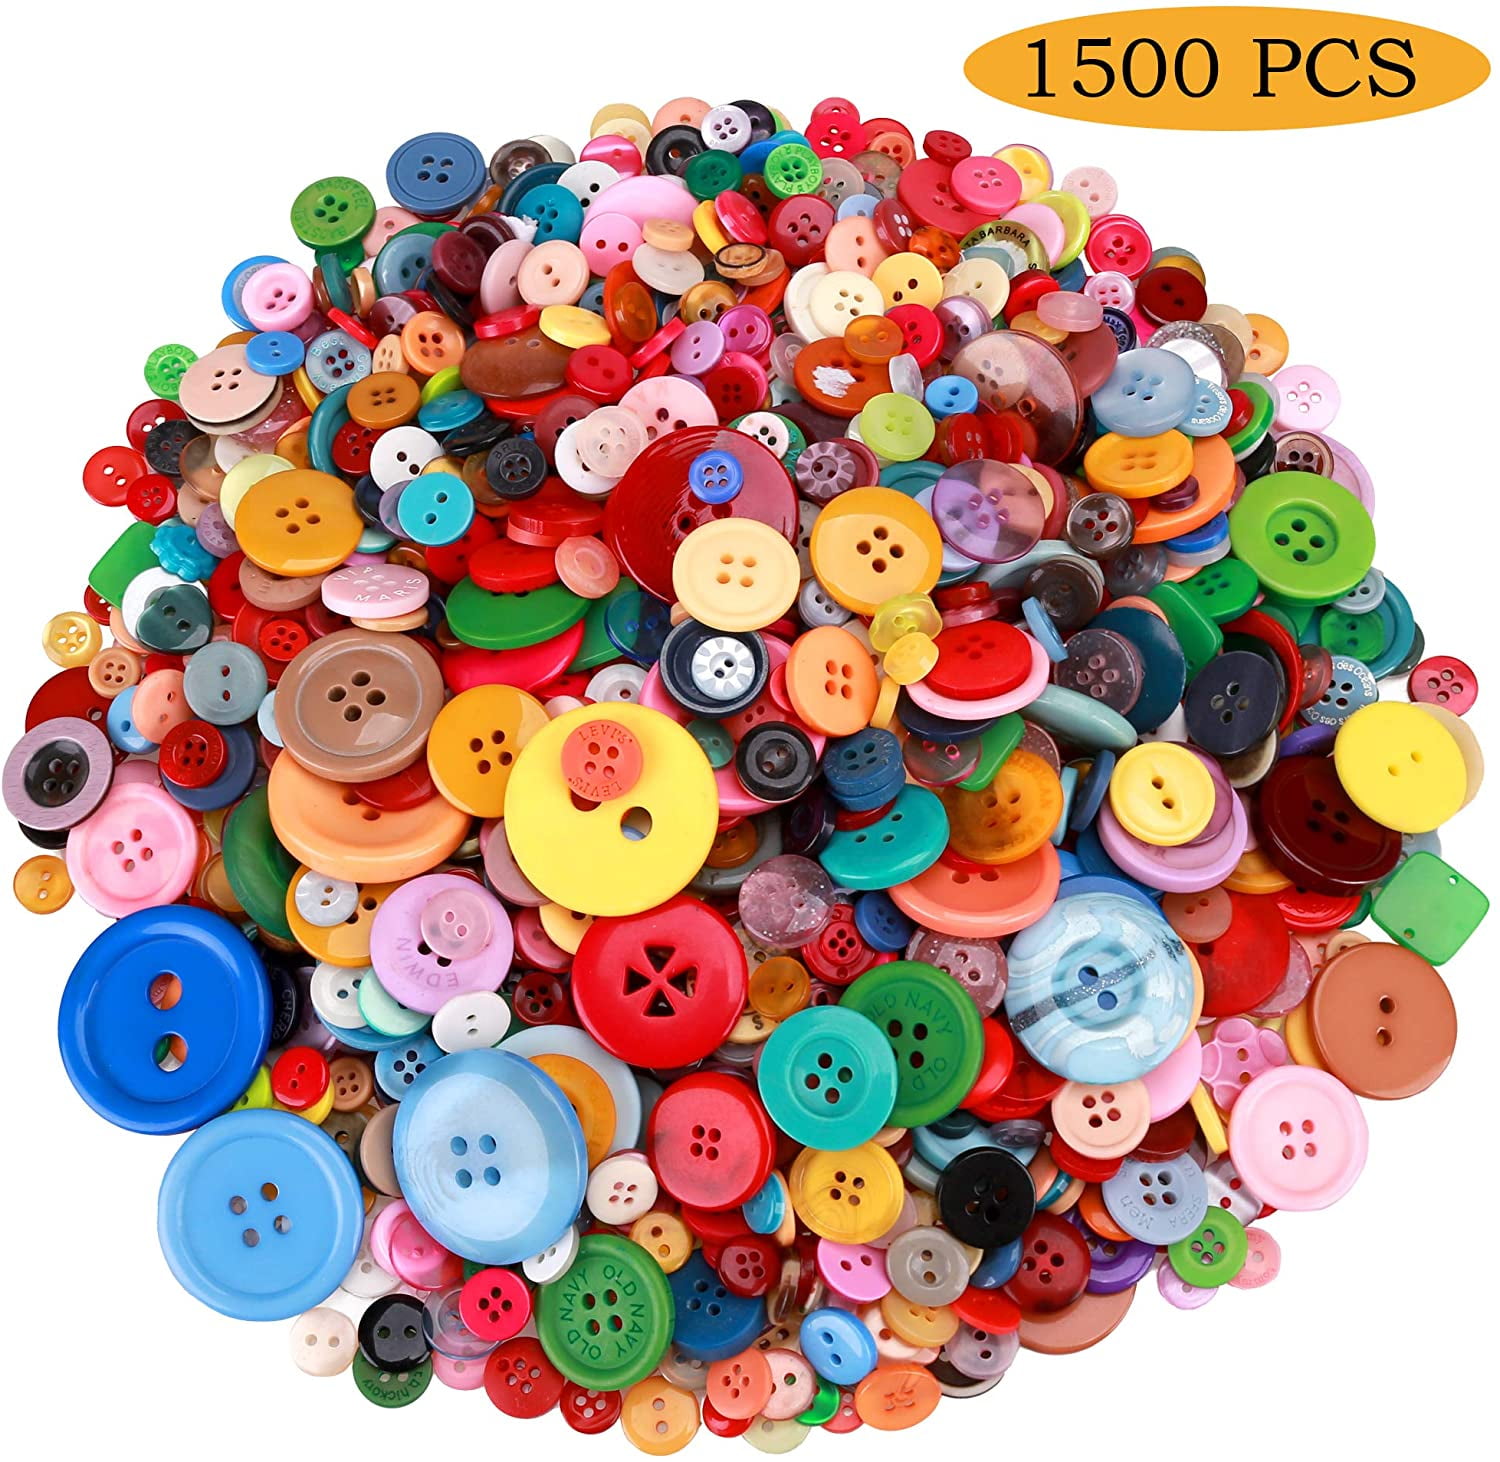 Vtg Mixed Lot Sets of Sewing Buttons Craft Buttons 12 oz. Button Sets #102